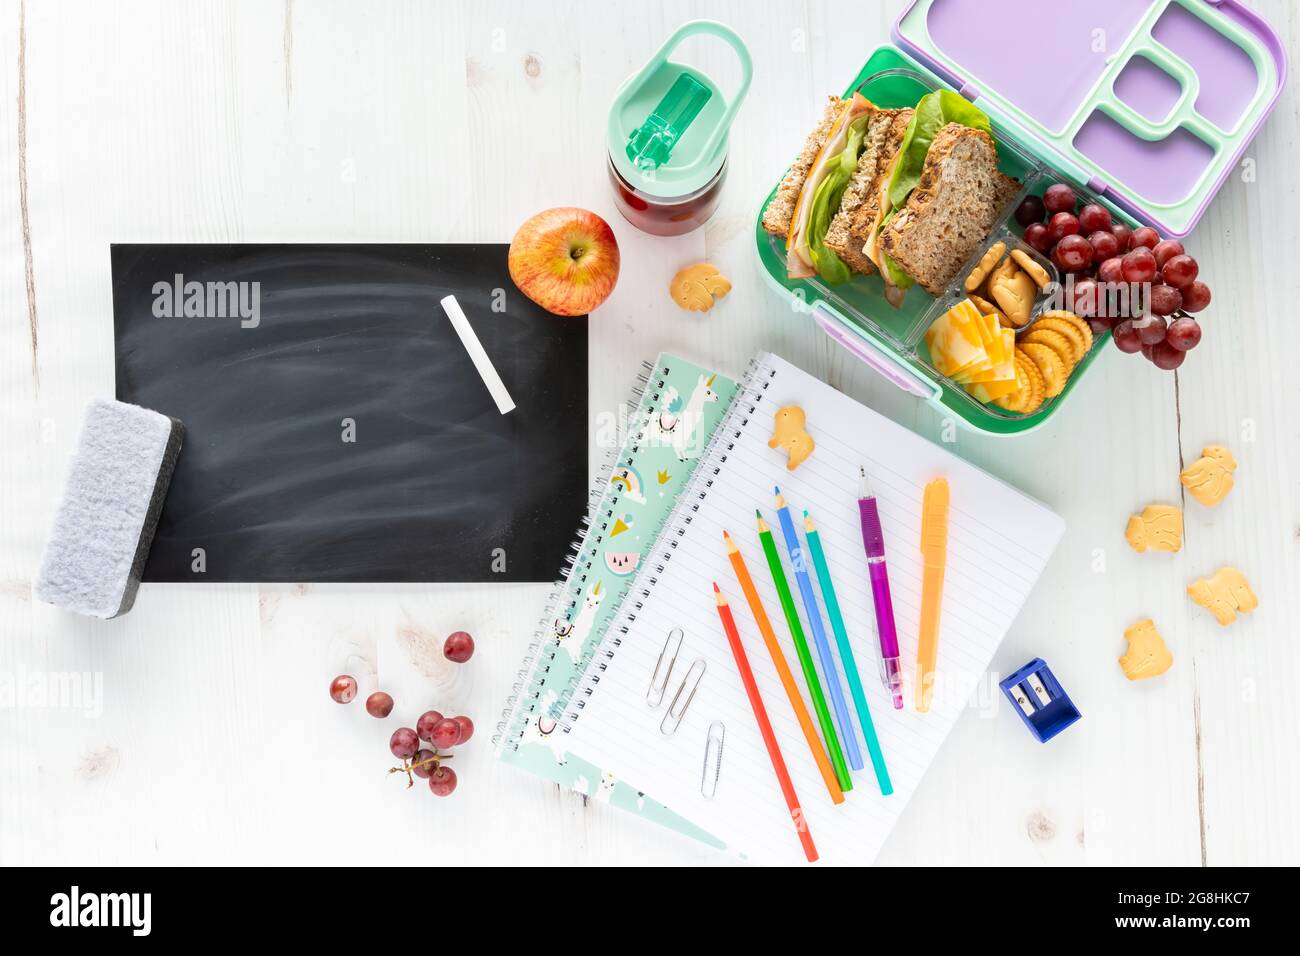 Top down view of an assortment of school supplies and lunch along with a blank chalkboard, chalk and eraser. Stock Photo